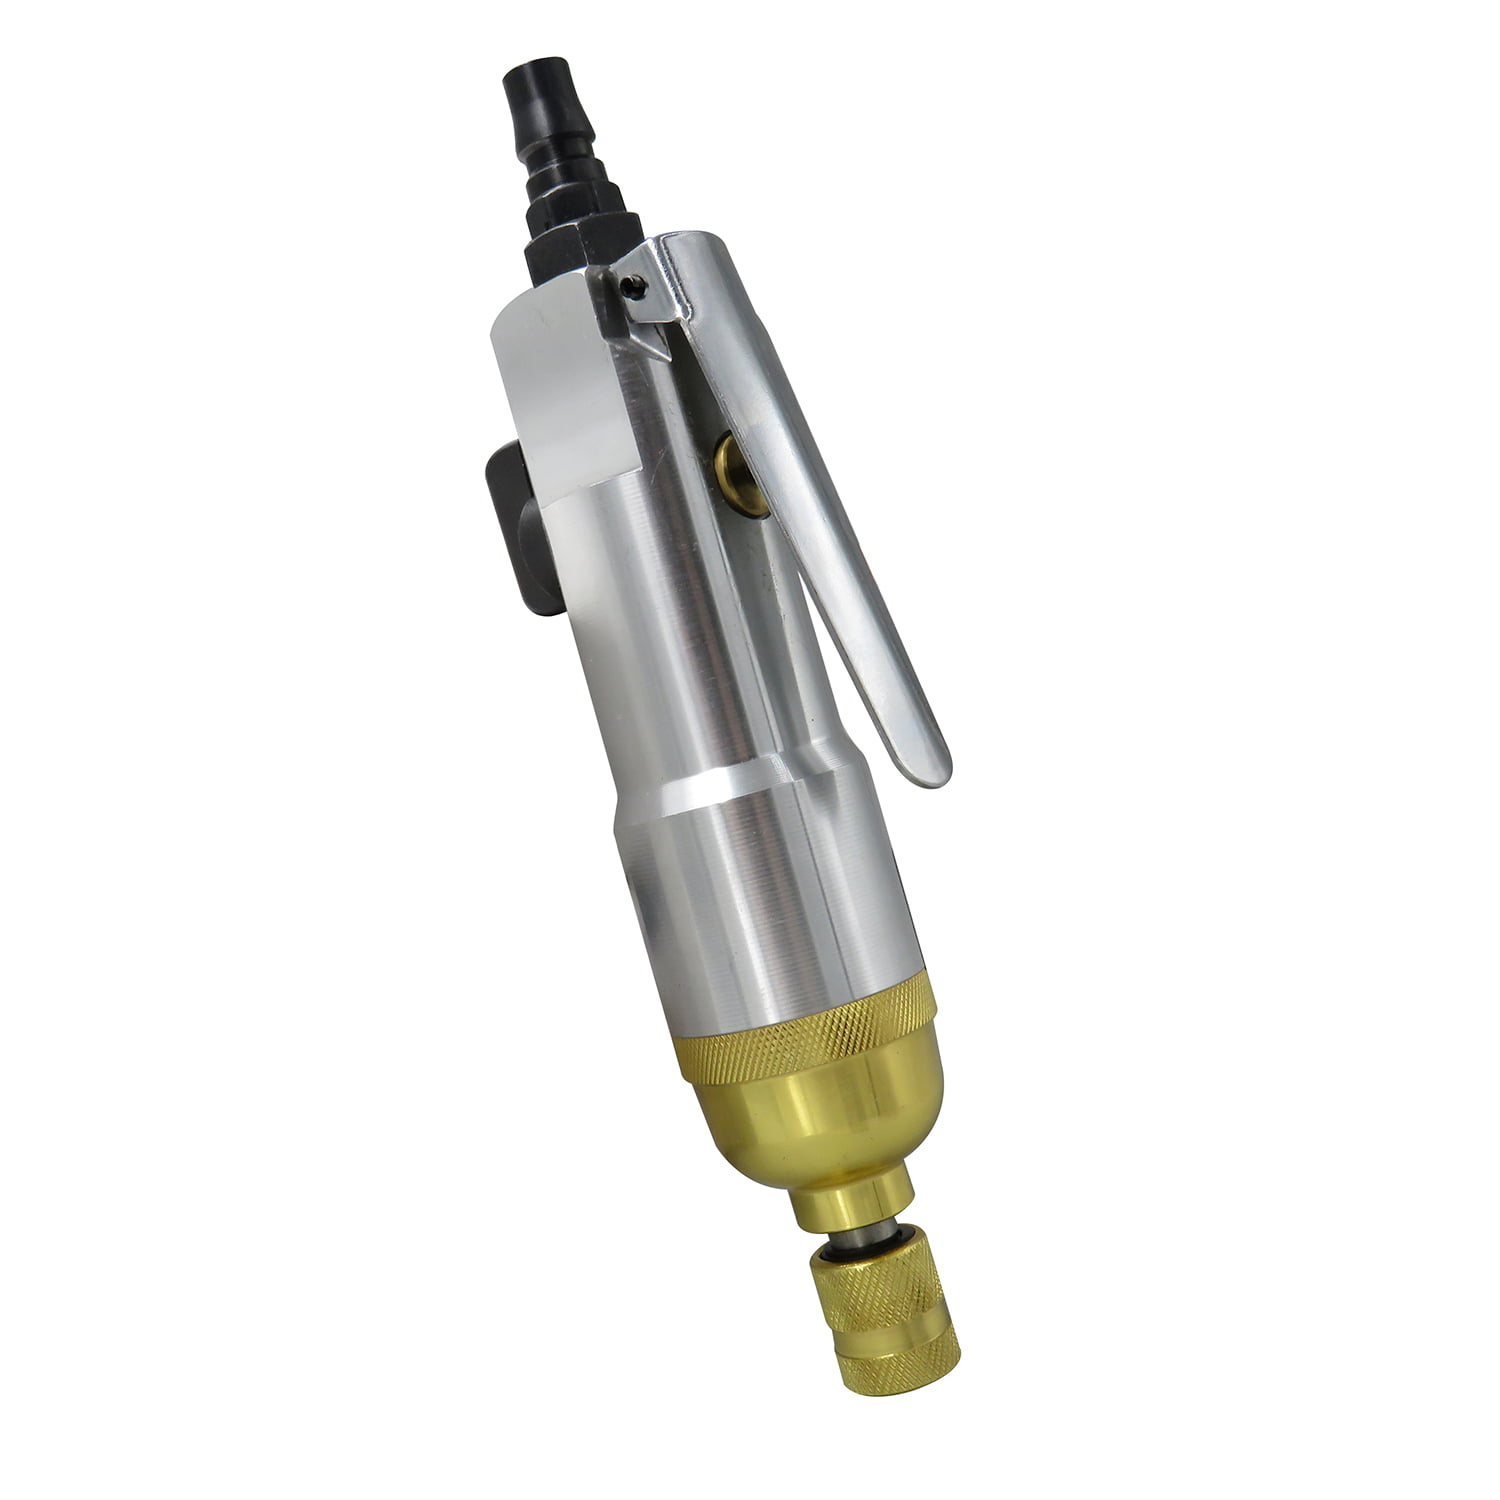 1/4 Pneumatic Air Screwdriver Straight Hand Industrial 9000rpm Reversible Screw Driver-High Efficiency/Low Noise Pneumatic Screwdriver 